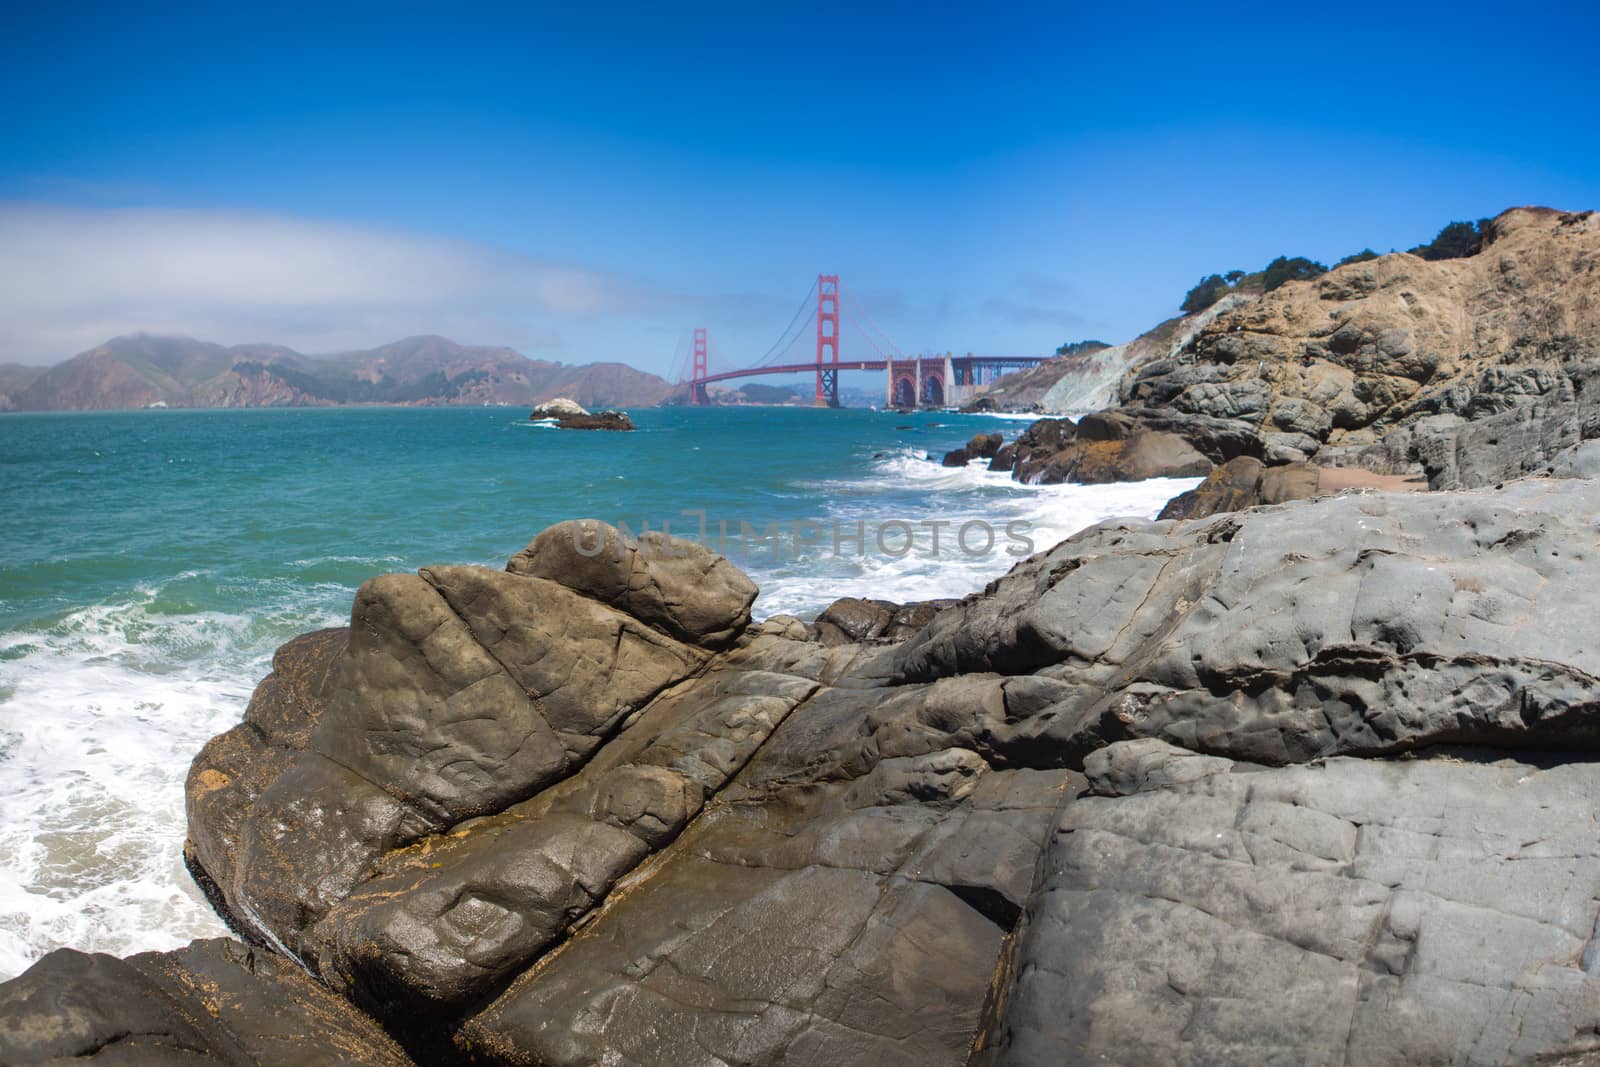 Panorama of the golden gate suspension bridge spanning the Golden Gate, the opening of the San Francisco Bay into the Pacific Ocean. As part of both U.S. Route 101 and California State Route 1, San Francisco 2012